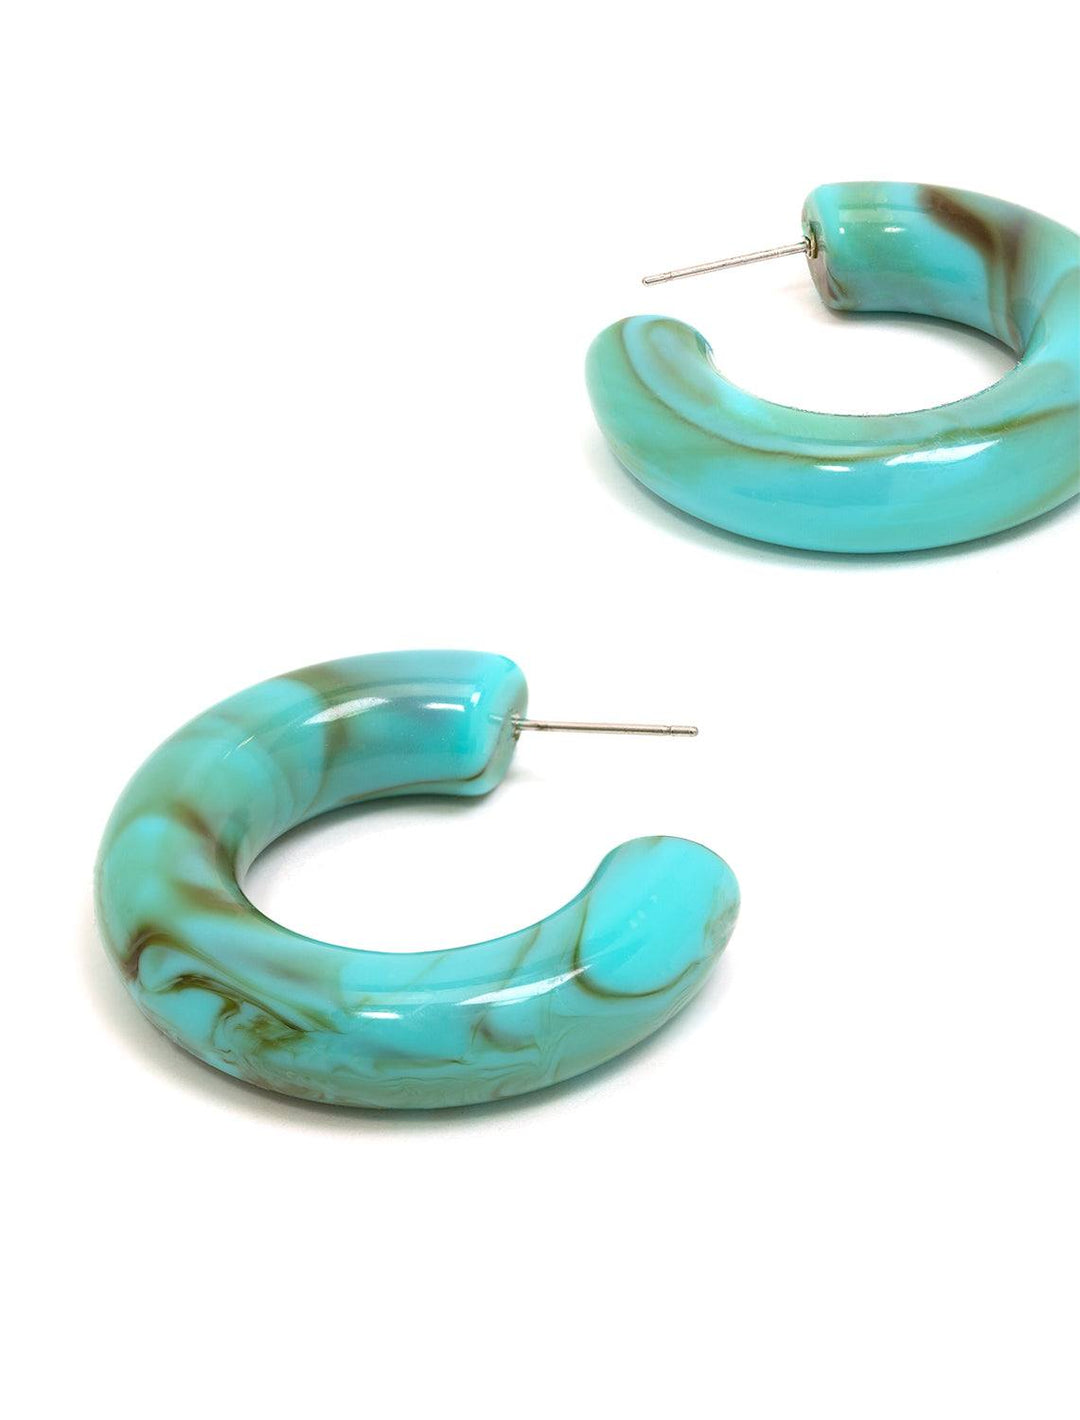 Stylized laydown of St. Armand's turquoise chunky hoops.